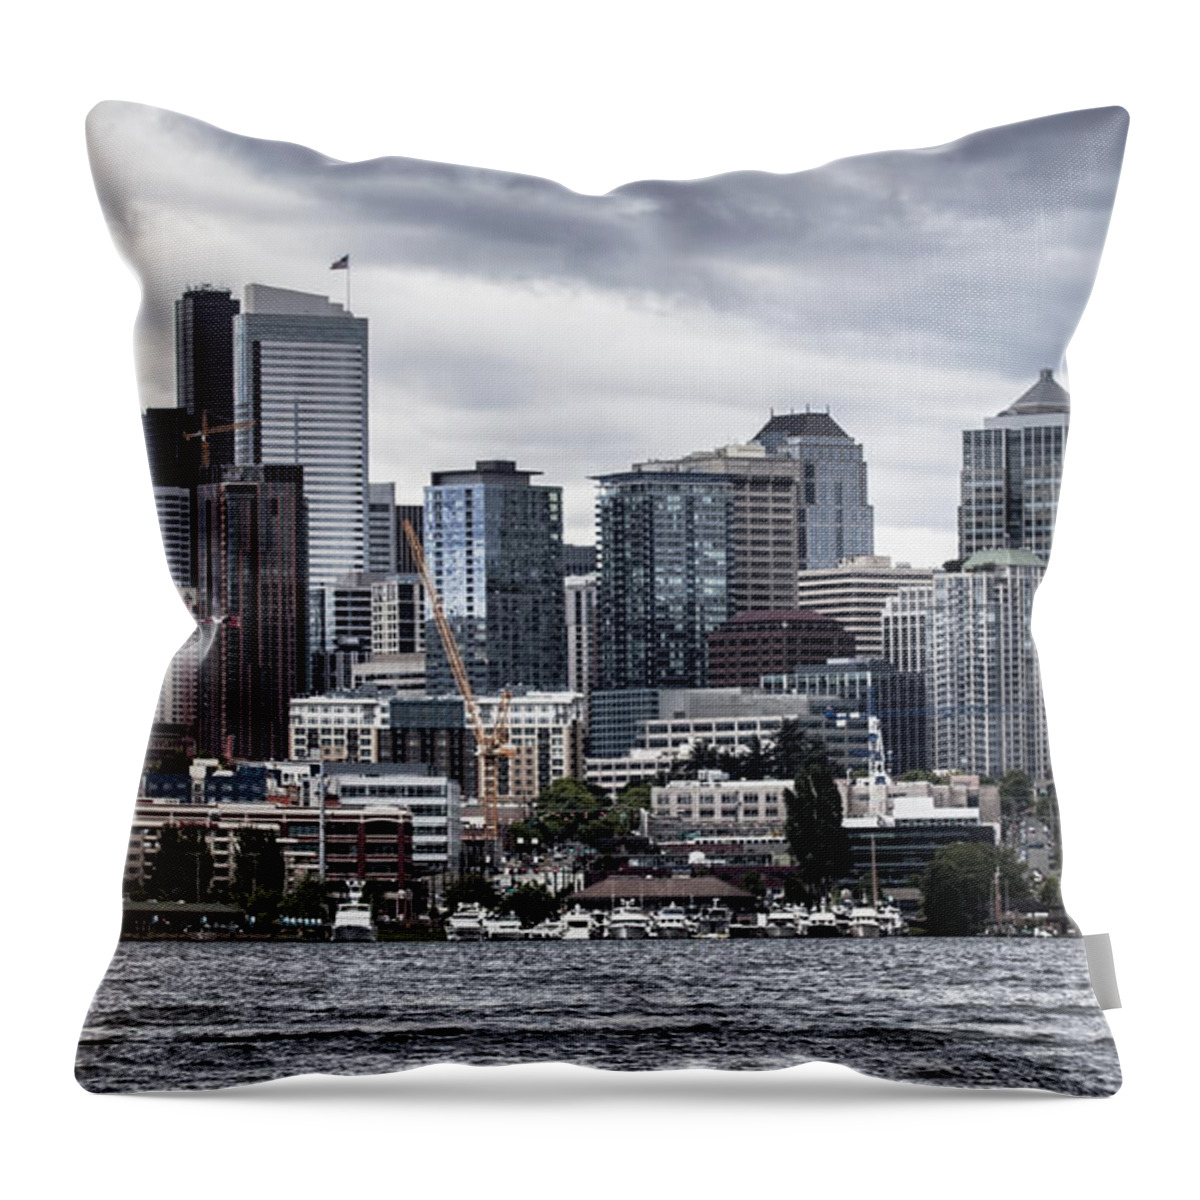 Seattle's Skyline Throw Pillow featuring the photograph Seattle's Skyline by Jeff Swanson